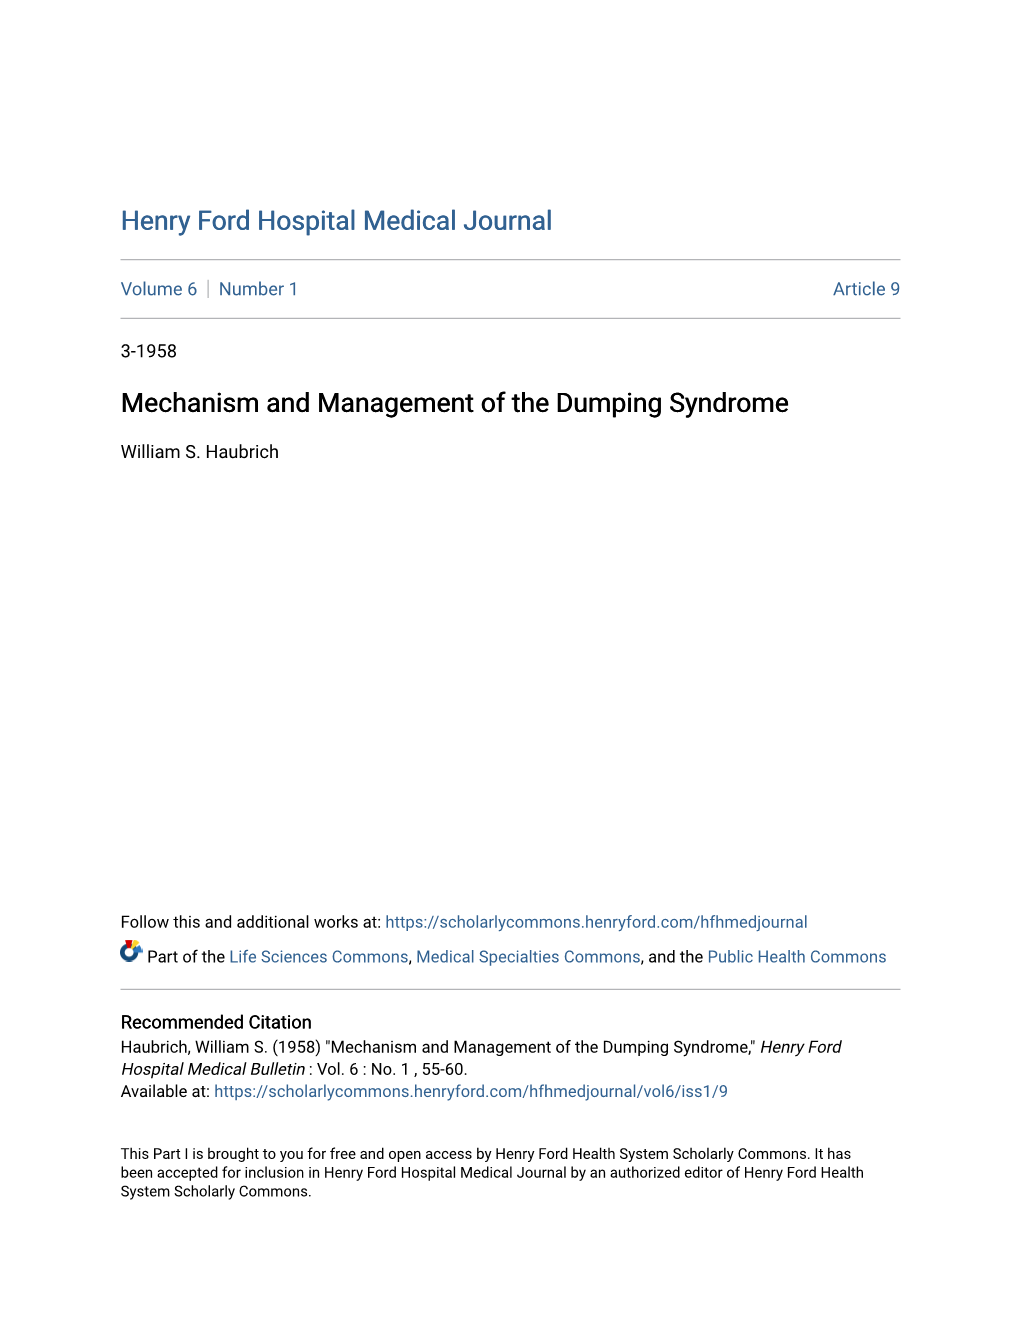 Mechanism and Management of the Dumping Syndrome